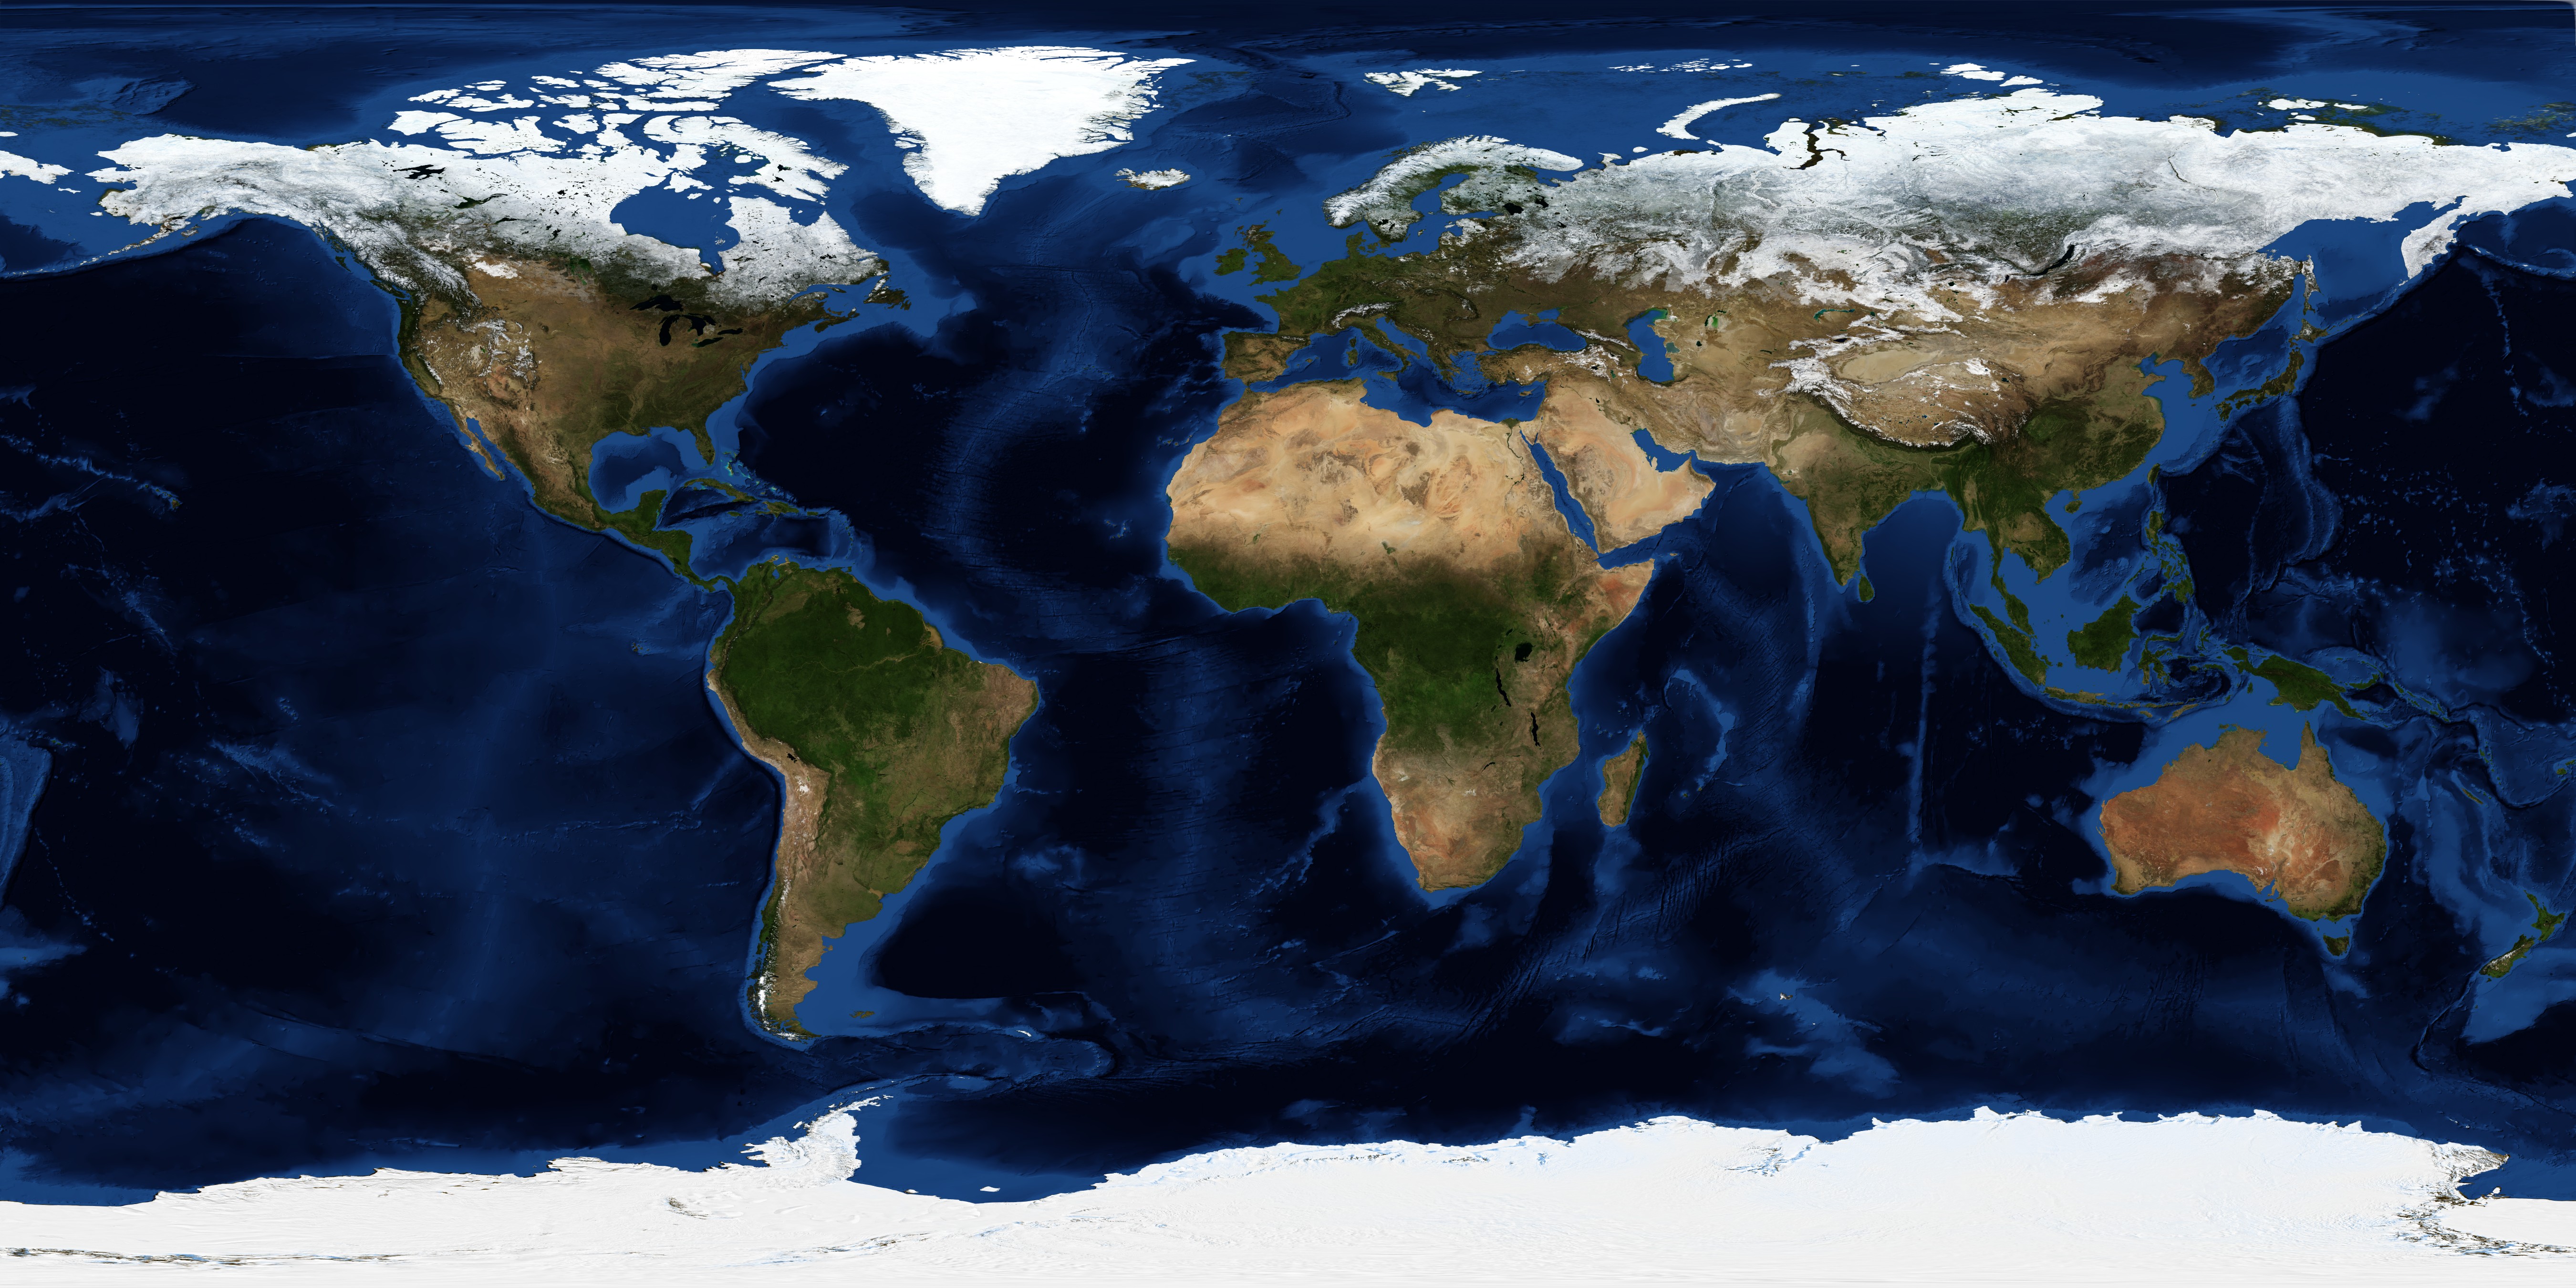 November, Blue Marble Next Generation w/ Topography and Bathymetry - related image preview